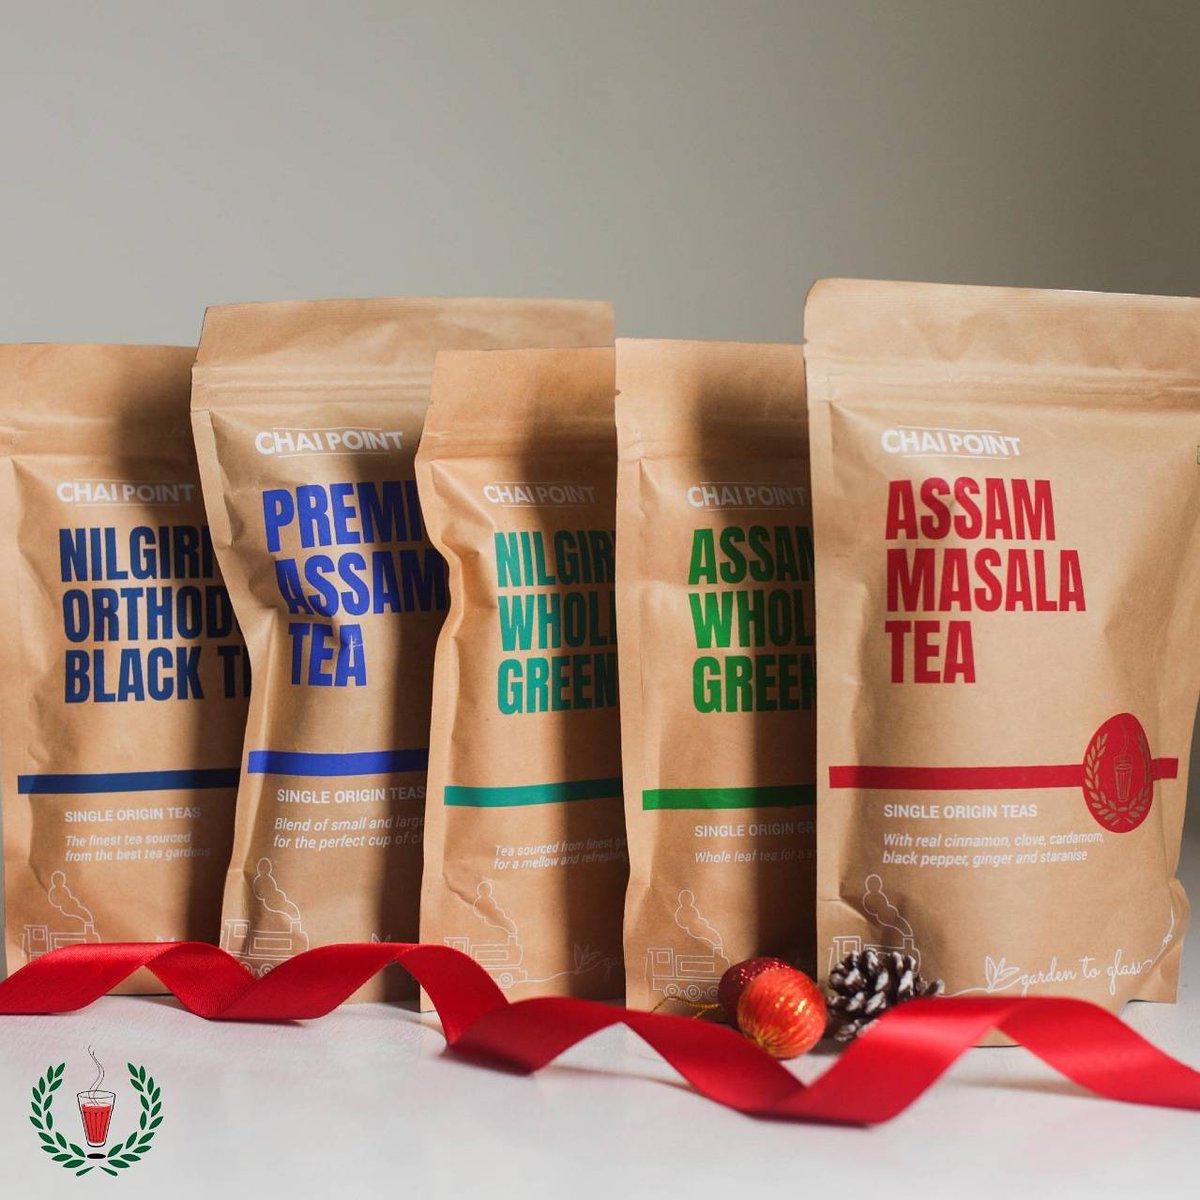 Christmas might be over, but it's not too late to gift your loved ones these packs of comfort. Have you tried our #Assam & #Nilgiri loose leaf teas yet? Head over to your nearest Chai Point store & grab them now! ☕😊

#gifitingseason #festivegifting #looseleaftea #wholeleaftea